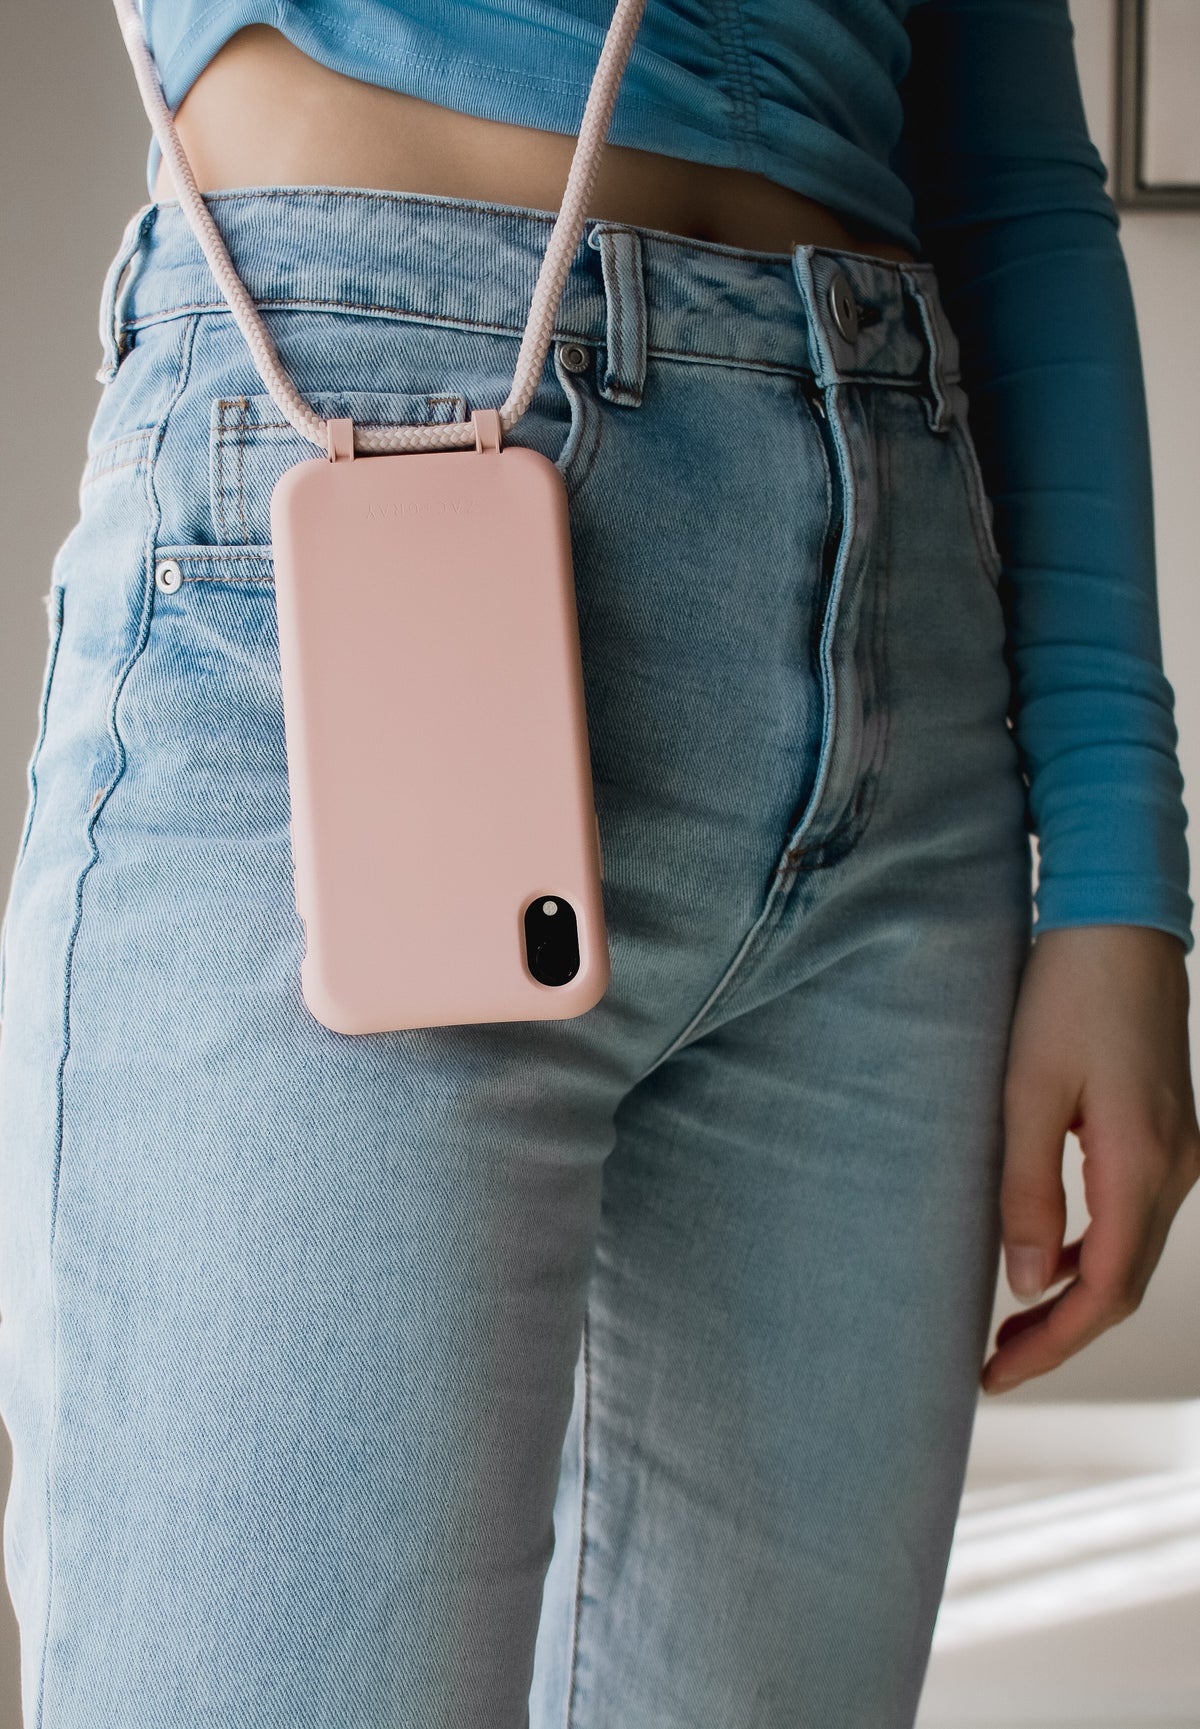 iPhone 12 and iPhone 12 Pro ROSÉ PINK CASE + ROSÉ PINK CORD